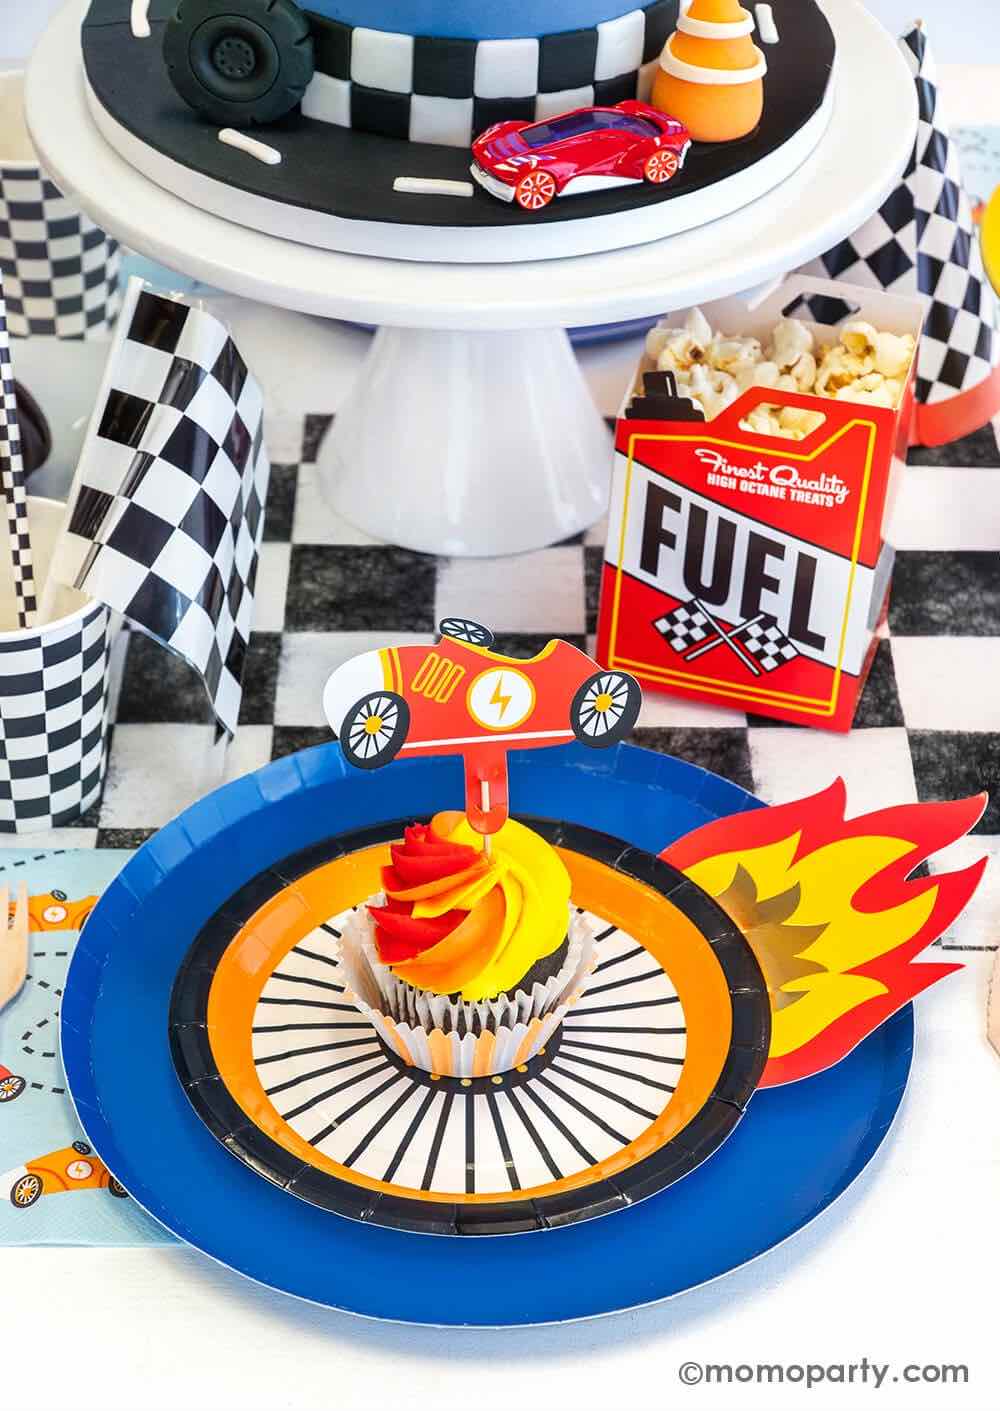 A close up shot of a Hot Wheels themed birthday party table featuring Momo Party's midnight dinner plates with wheel shaped plates, checkered table runner, party cups, paper straws and party cups, Fuel gas shaped treat box with popcorn and blue race car napkins. On the plates there's a orange and red swirl cupcake topped with vintage race car topper - a perfect inspo for boy's Hot Wheels themed birthday party.